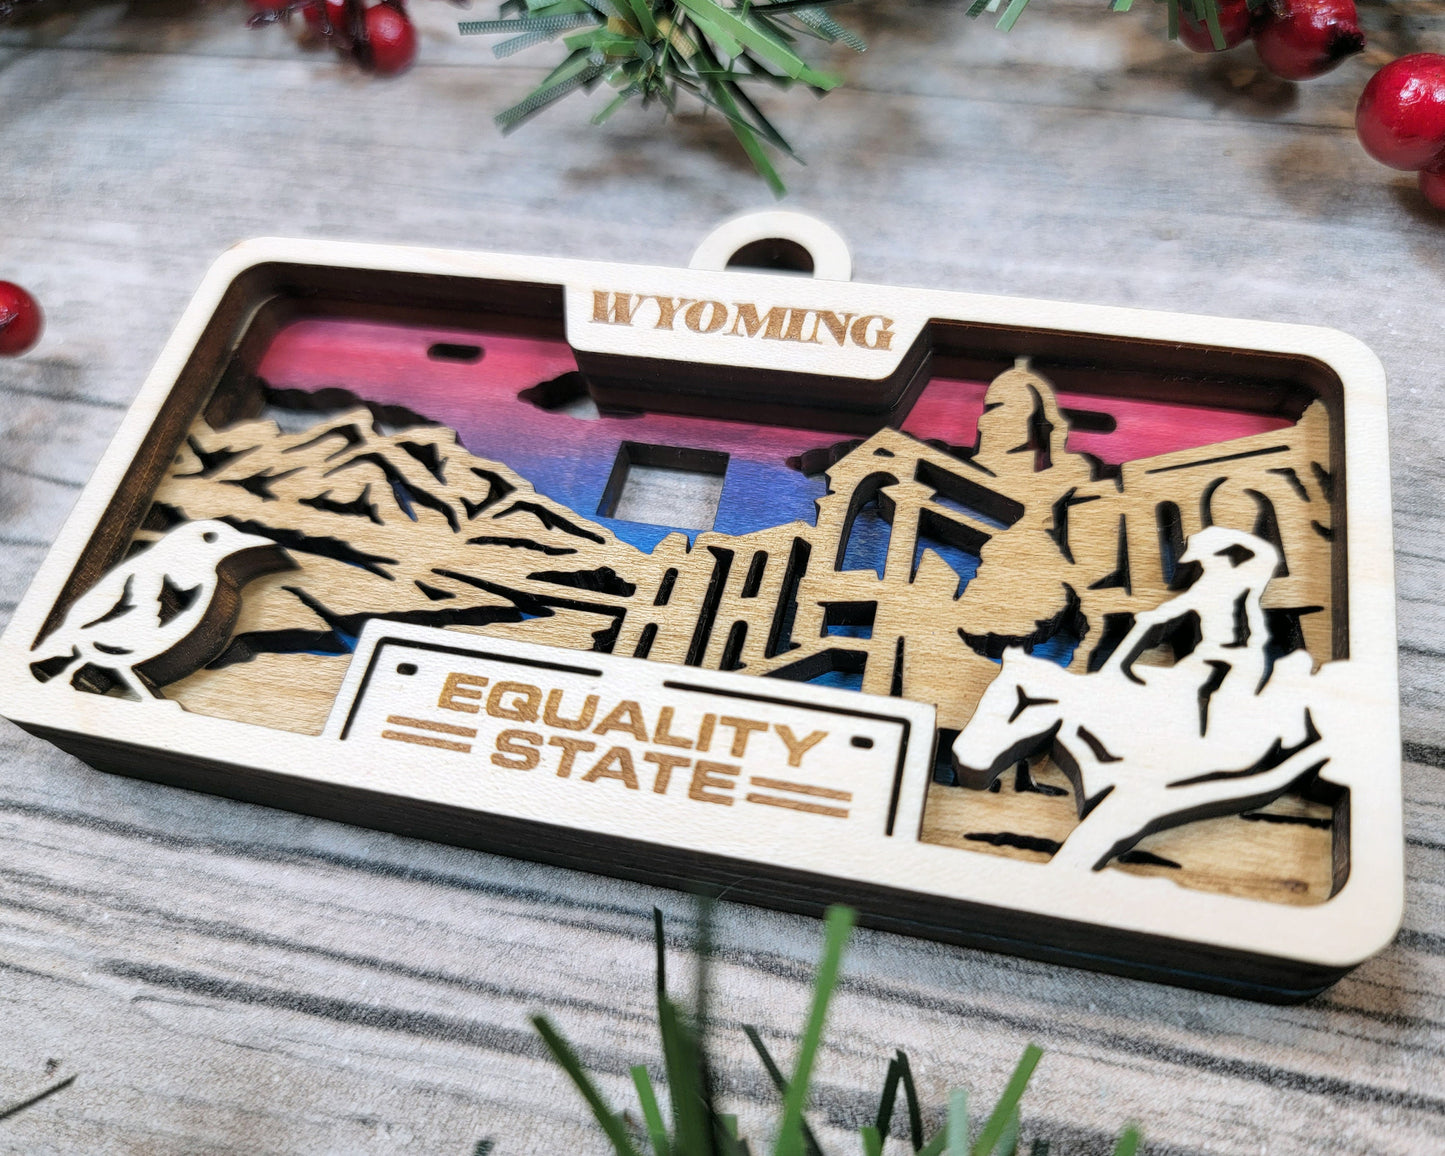 Wyoming State Plate Ornament and Signage - SVG File Download - Sized for Glowforge - Laser Ready Digital Files